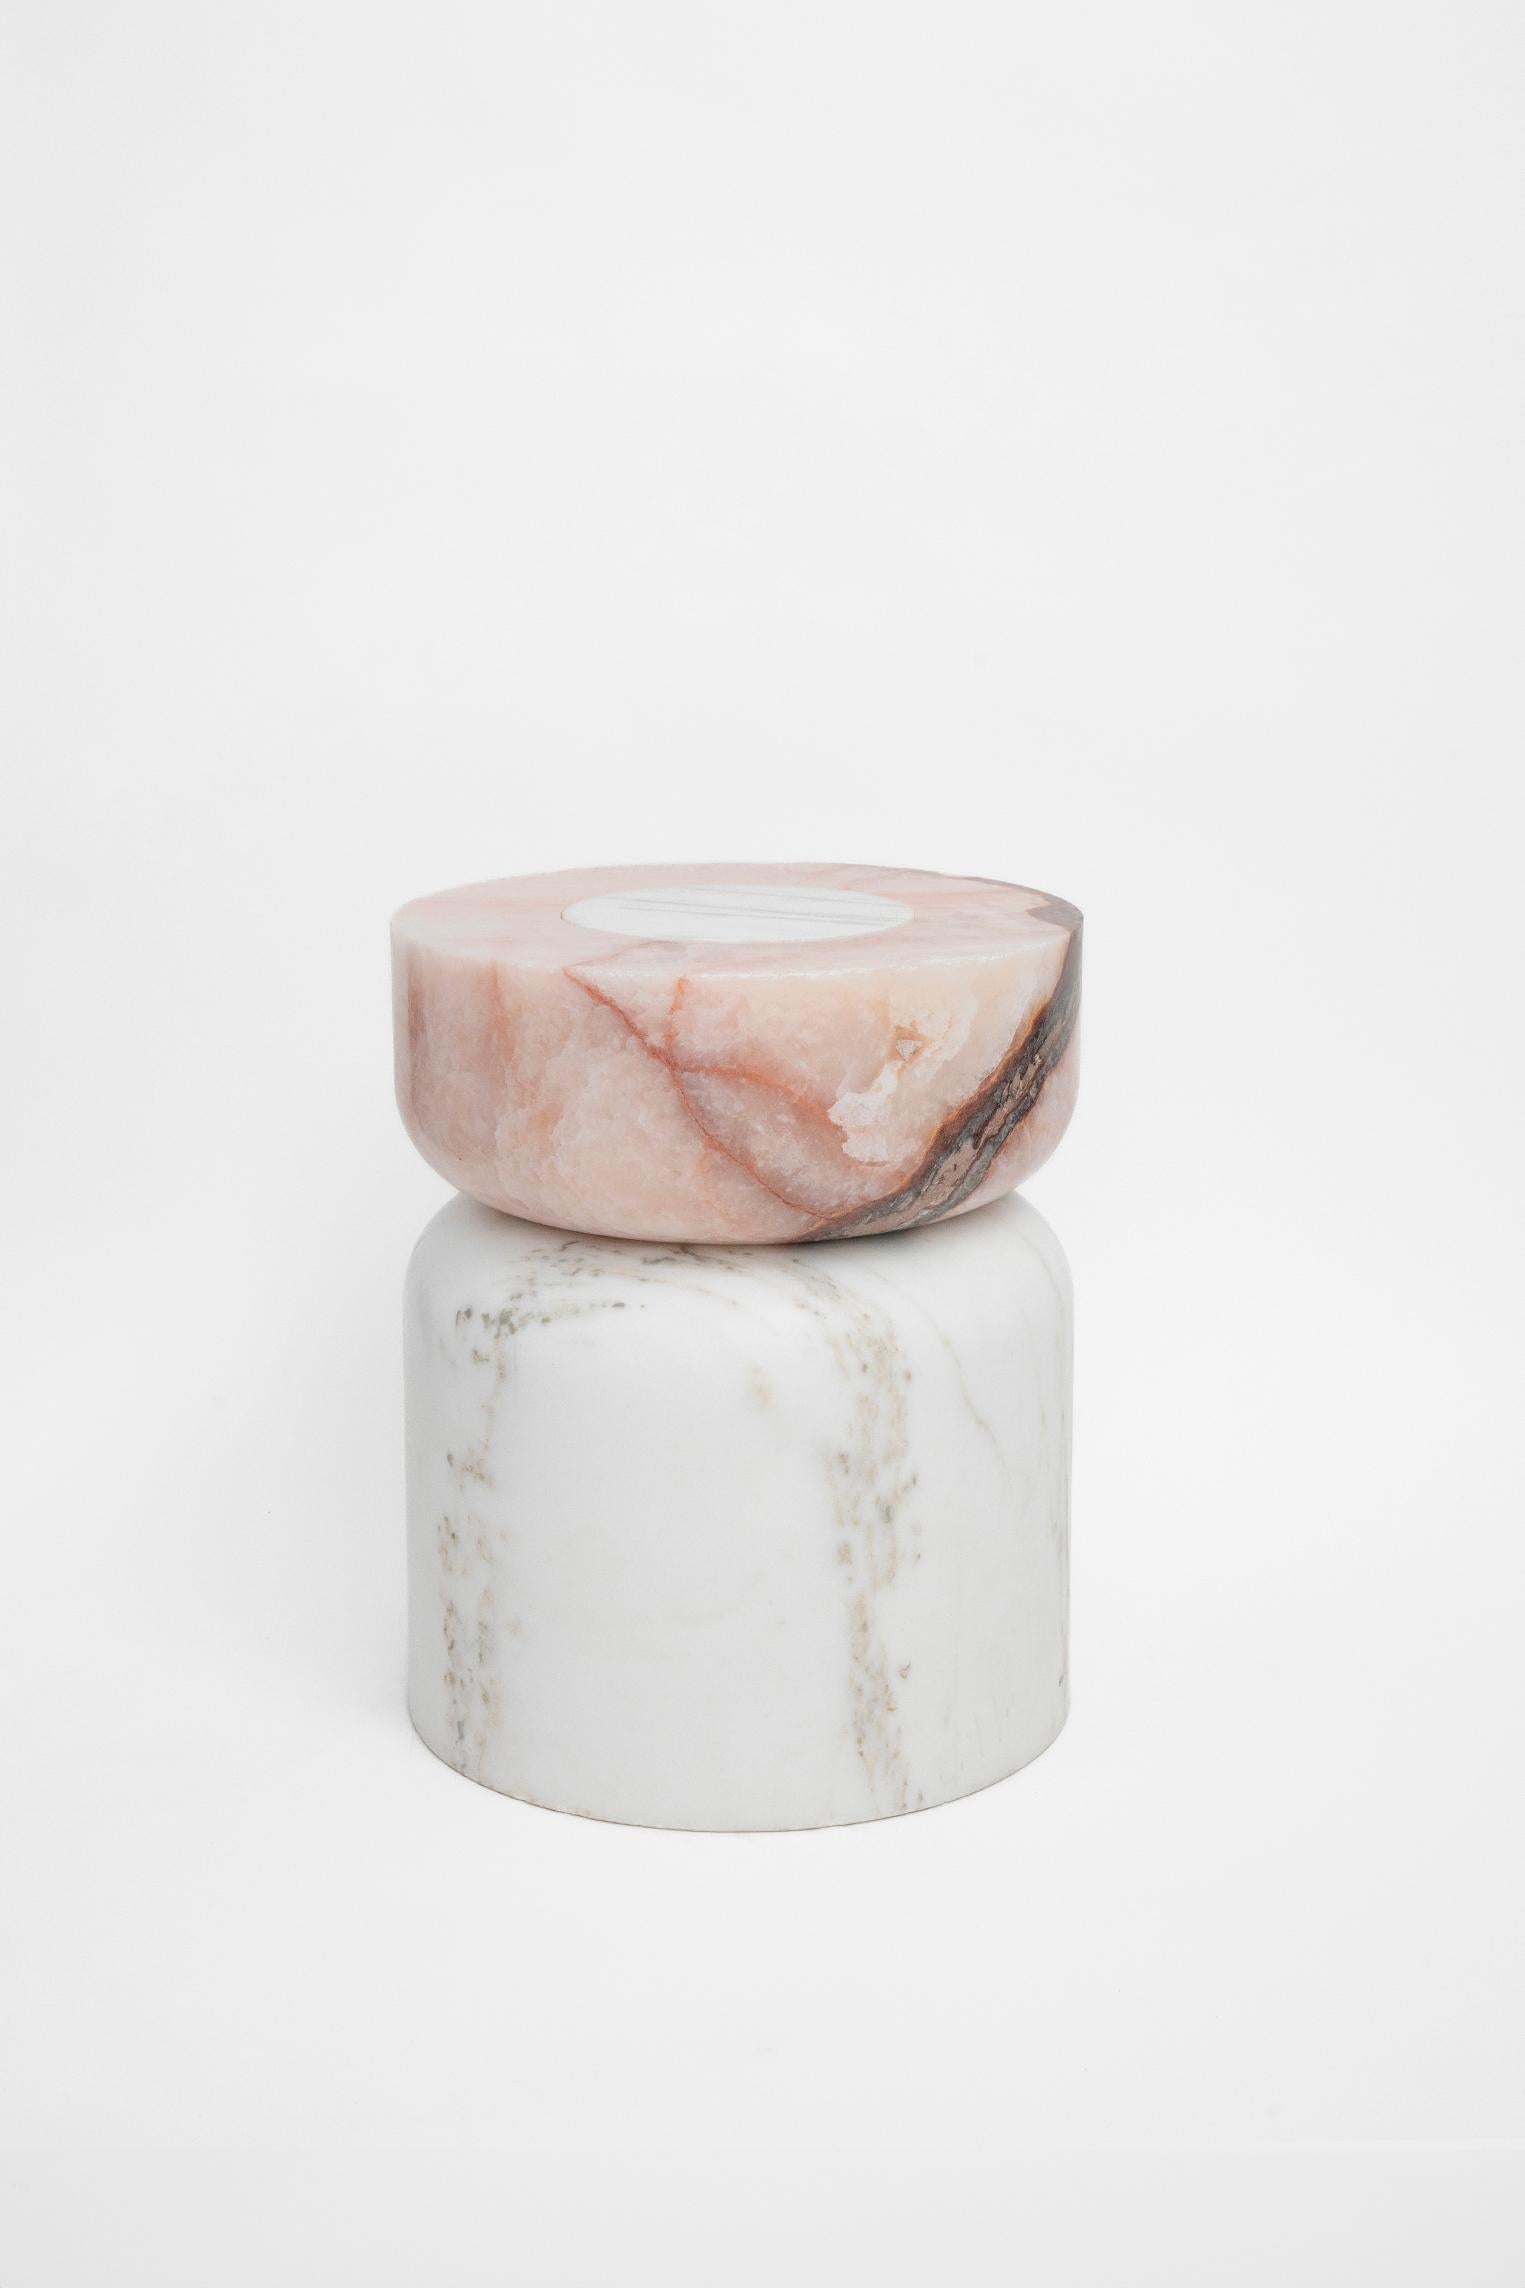 Organic Modern Volcanic Shade of Marble IV Stool/Table by Sten Studio, REP by Tuleste Factory For Sale